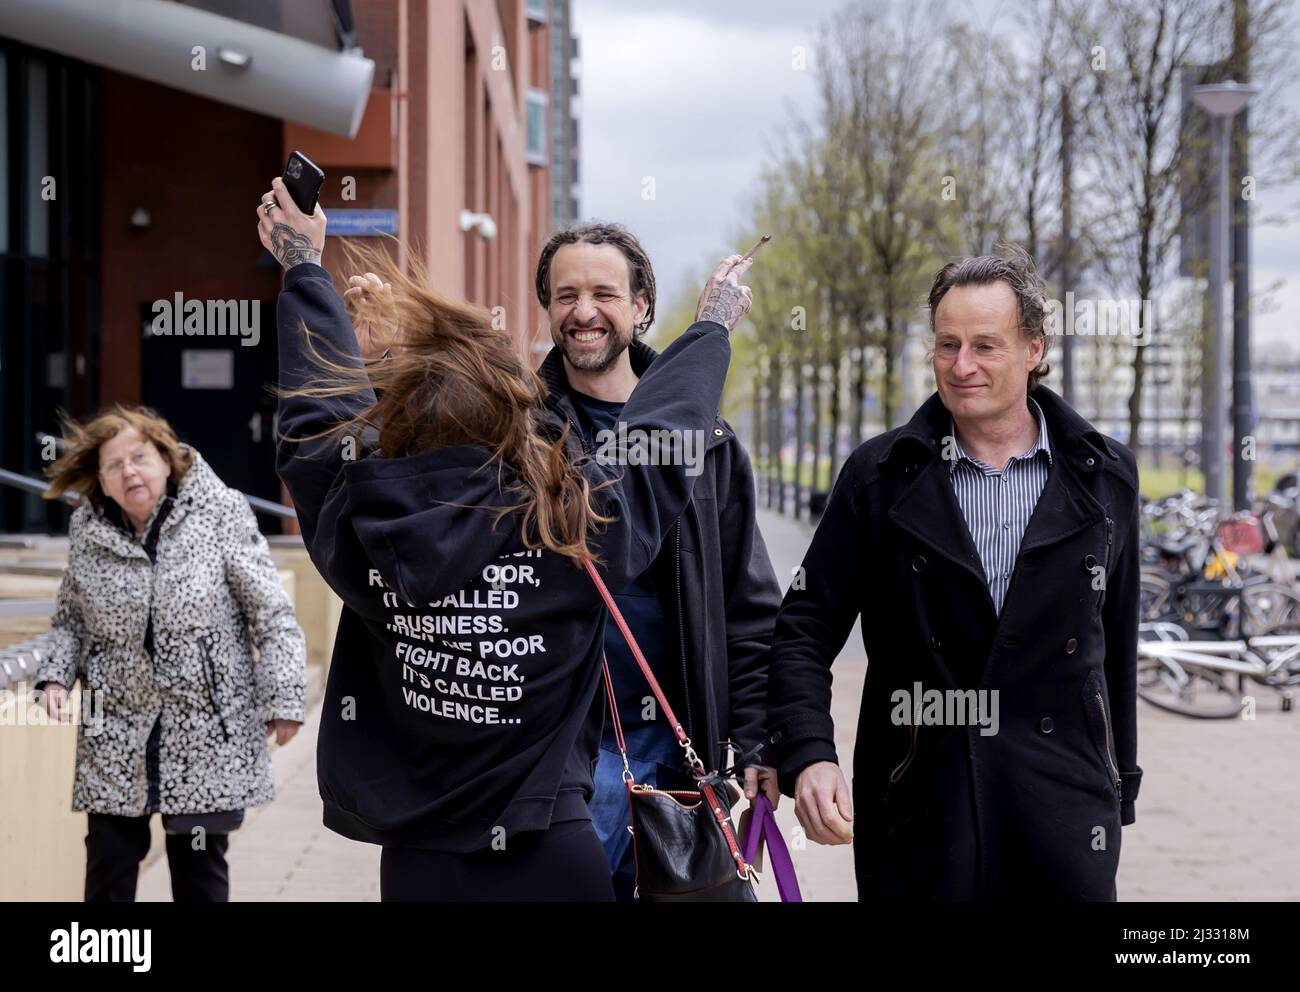 2022-04-05 14:30:05 ROTTERDAM - Willem Engel is welcomed by his girlfriend Dorien Rose when he leaves the court together with Jeroen Pols, the lawyer of Viruswaarheid, after his remand has been lifted. The foreman of Viruswaarheid was arrested again on April 3, after various media outlets published a conversation with Engel recorded in the studio of Café Weltschmerz. Engel's pre-trial detention was suspended on the condition that he would not make any statements on social media. ANP ROBIN VAN LONKHUIJSEN netherlands out - belgium out Stock Photo